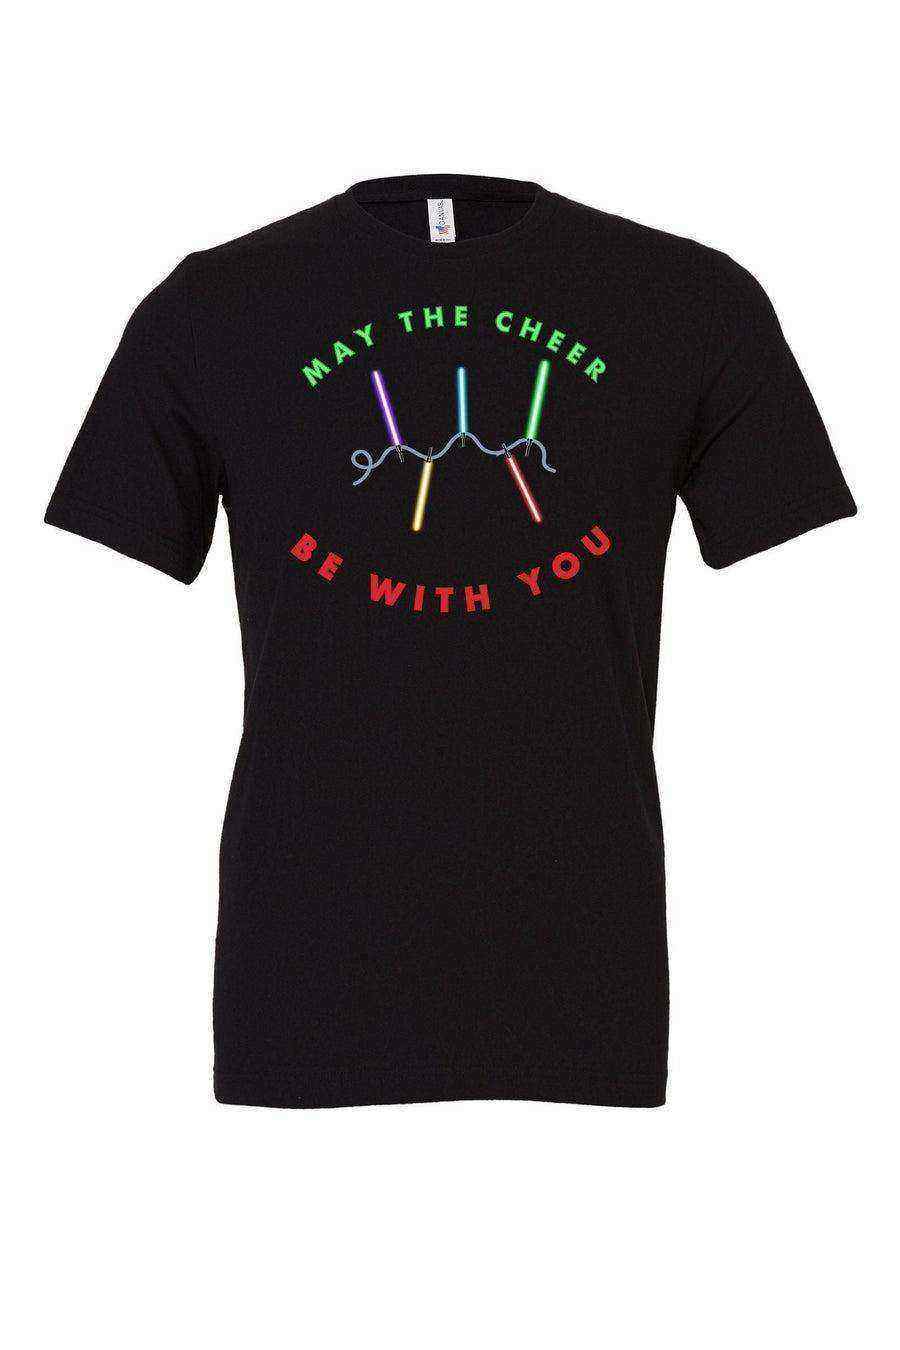 Womens | May The Cheer Be With You Shirt | Star Wars Christmas Shirt - Dylan's Tees